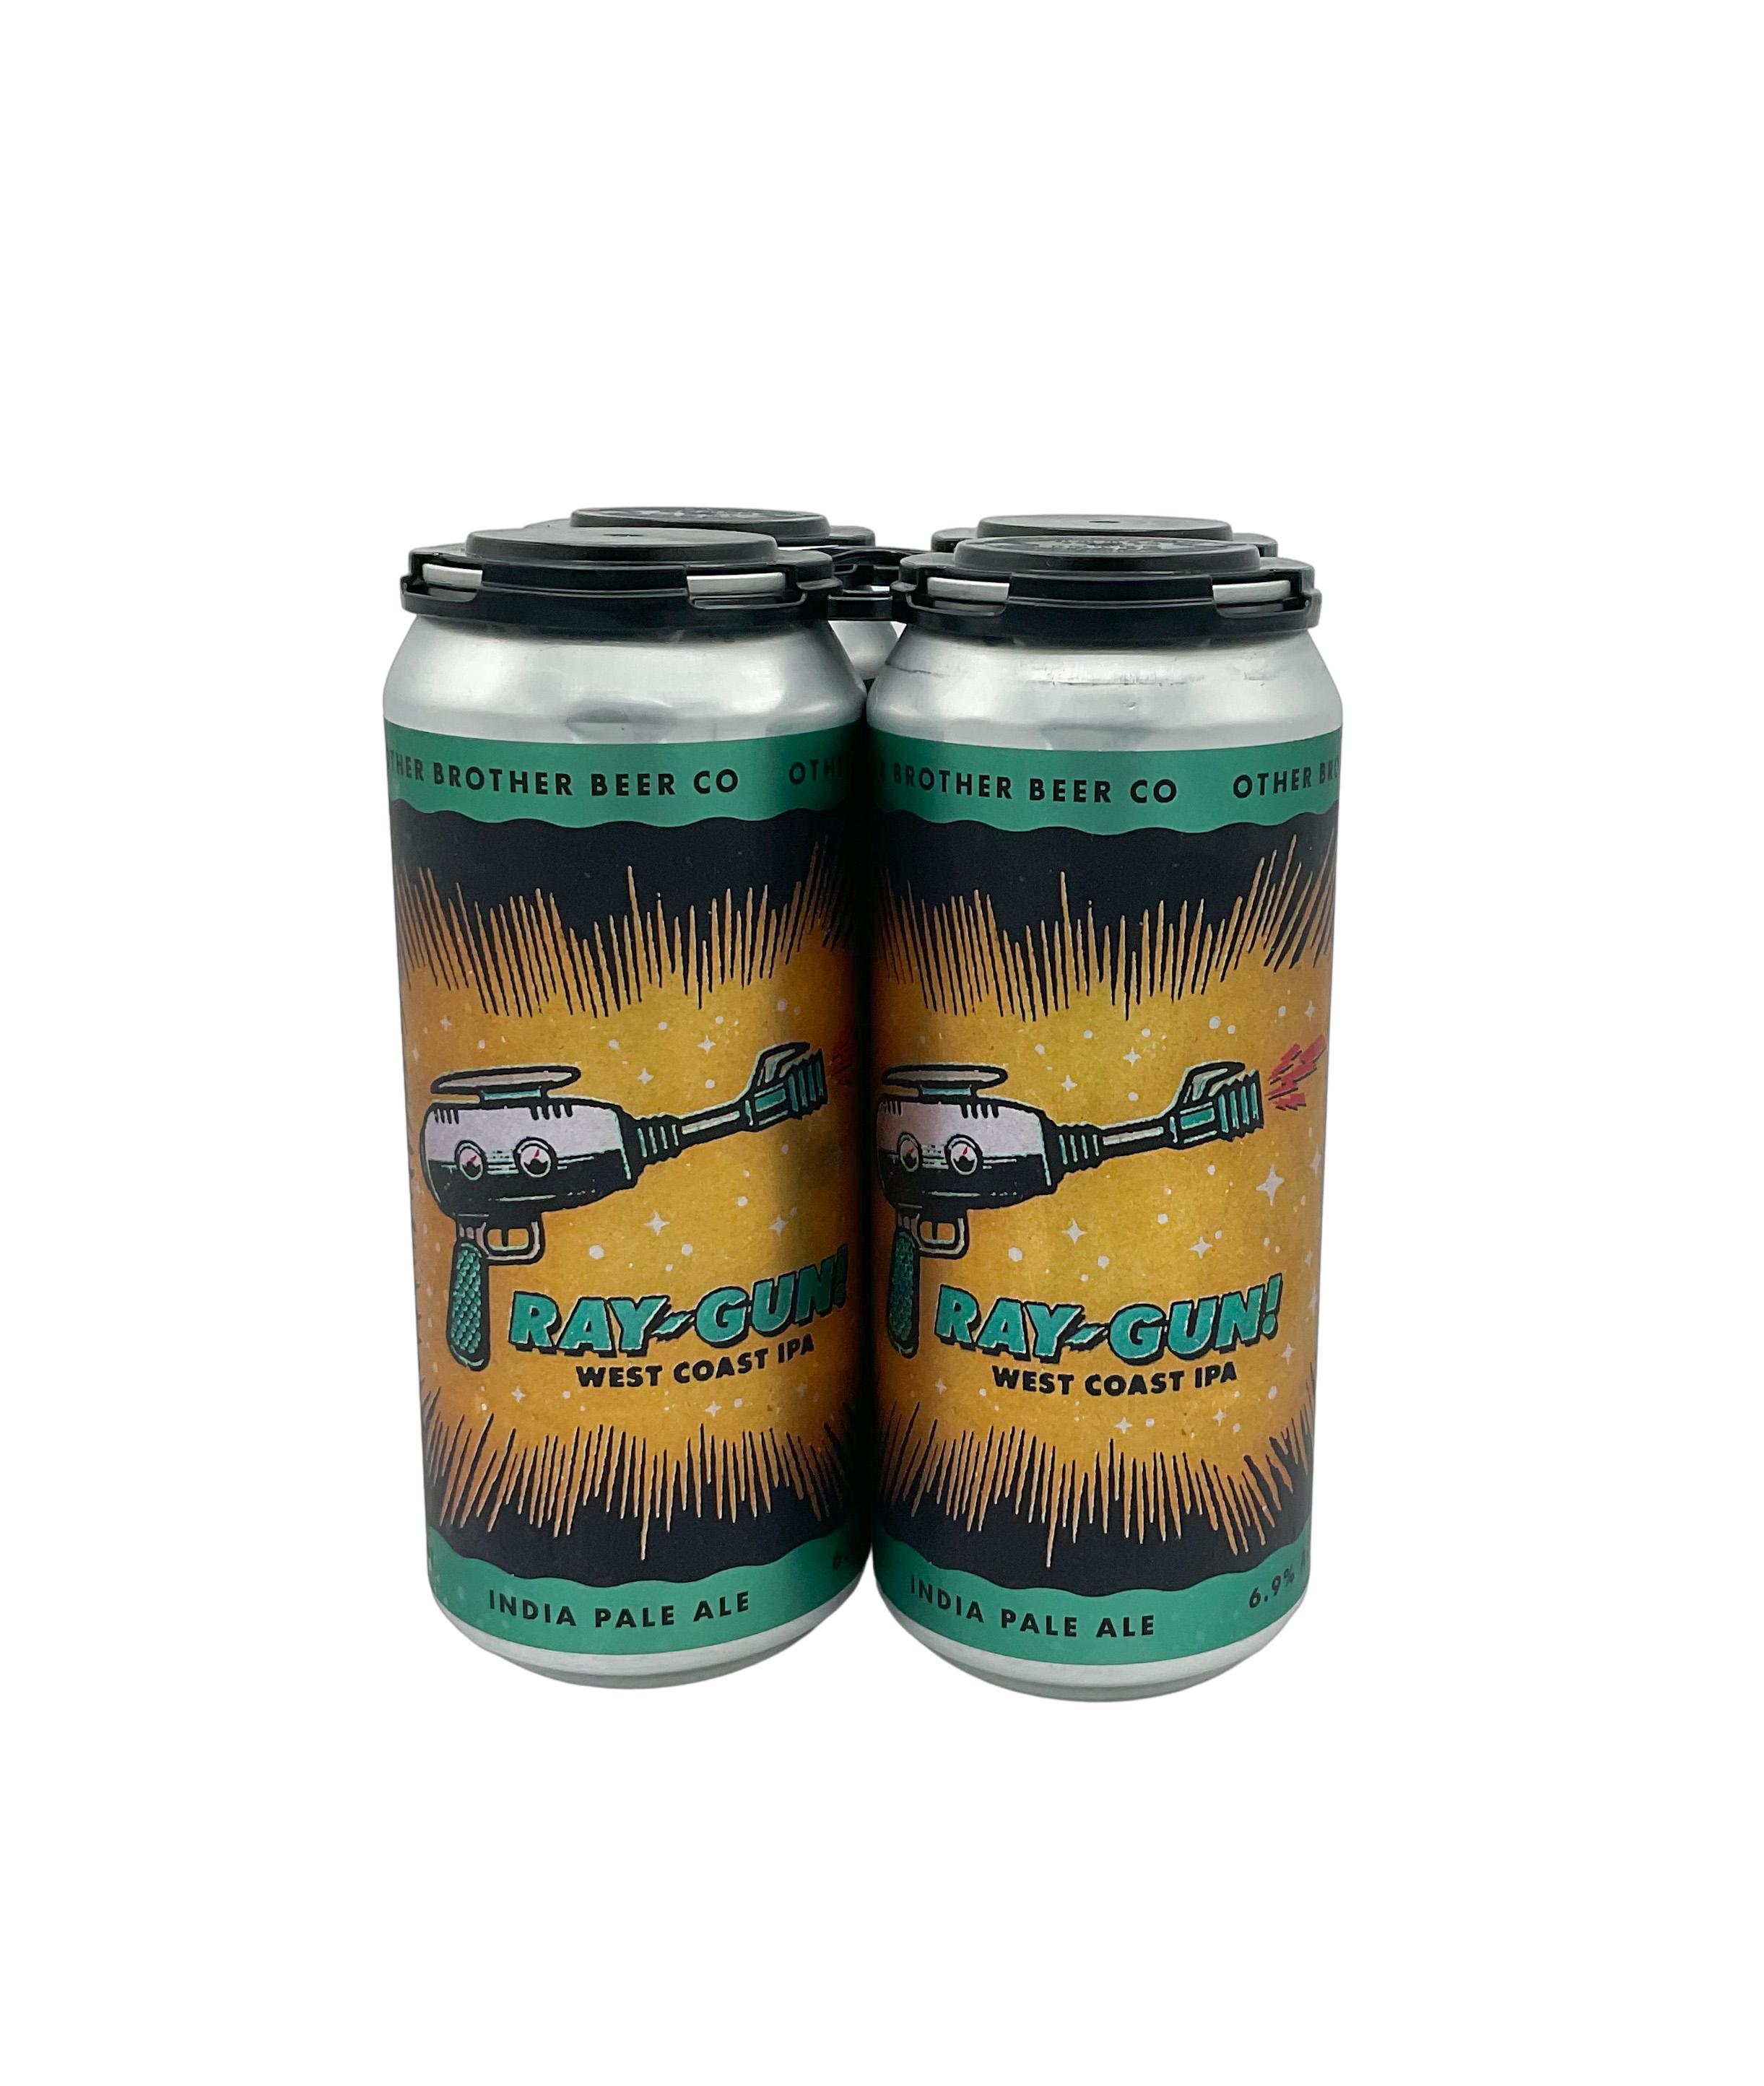 Ray-Gun - West Coast IPA - 6.9% ABV - 4-Pack-16 oz Cans – Other